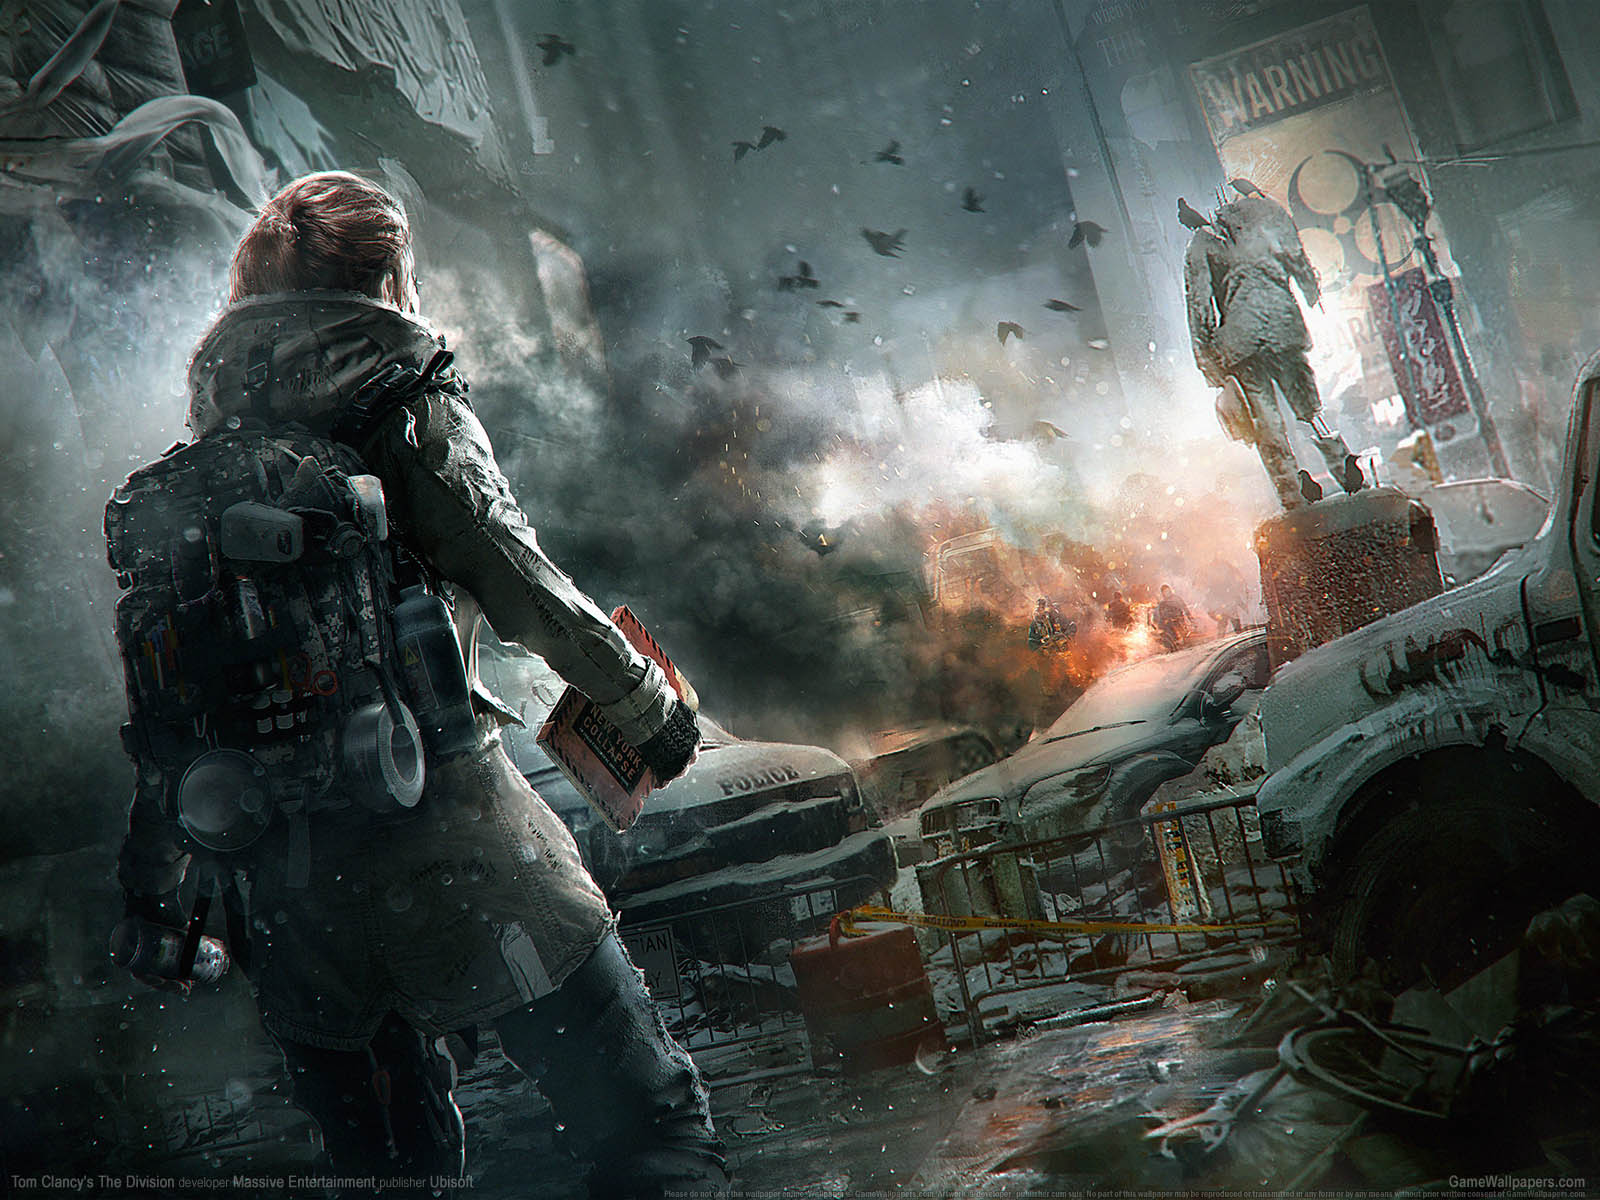 Tom Clancy's The Divisionνmmer=08 achtergrond  1600x1200